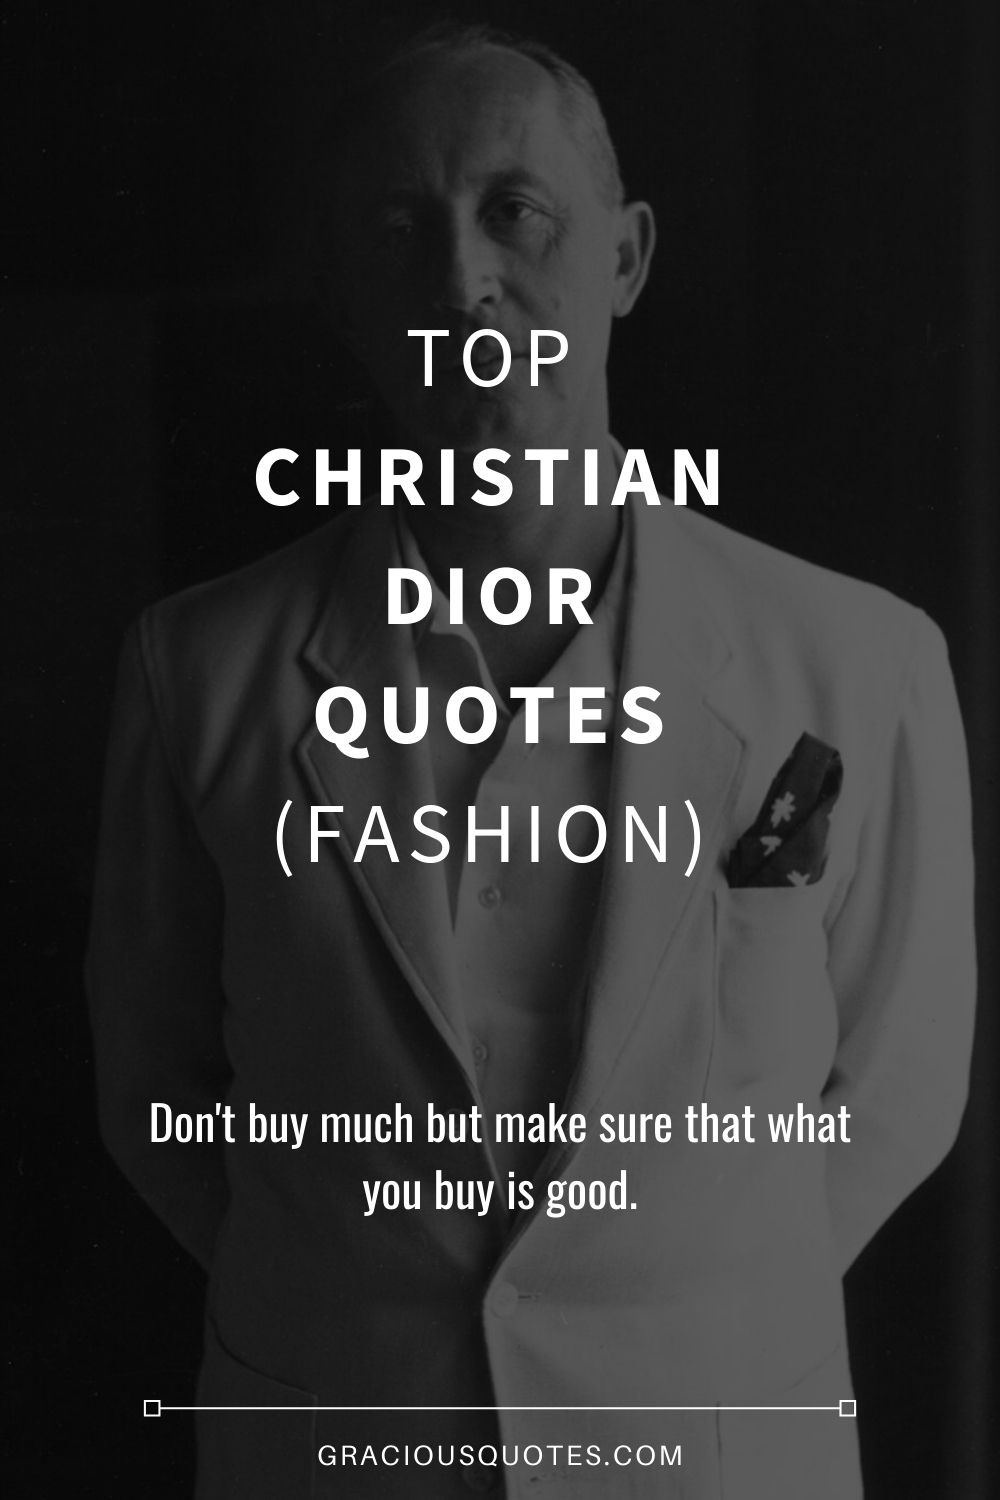 Top Christian Dior Quotes FASHION Gracious Quotes